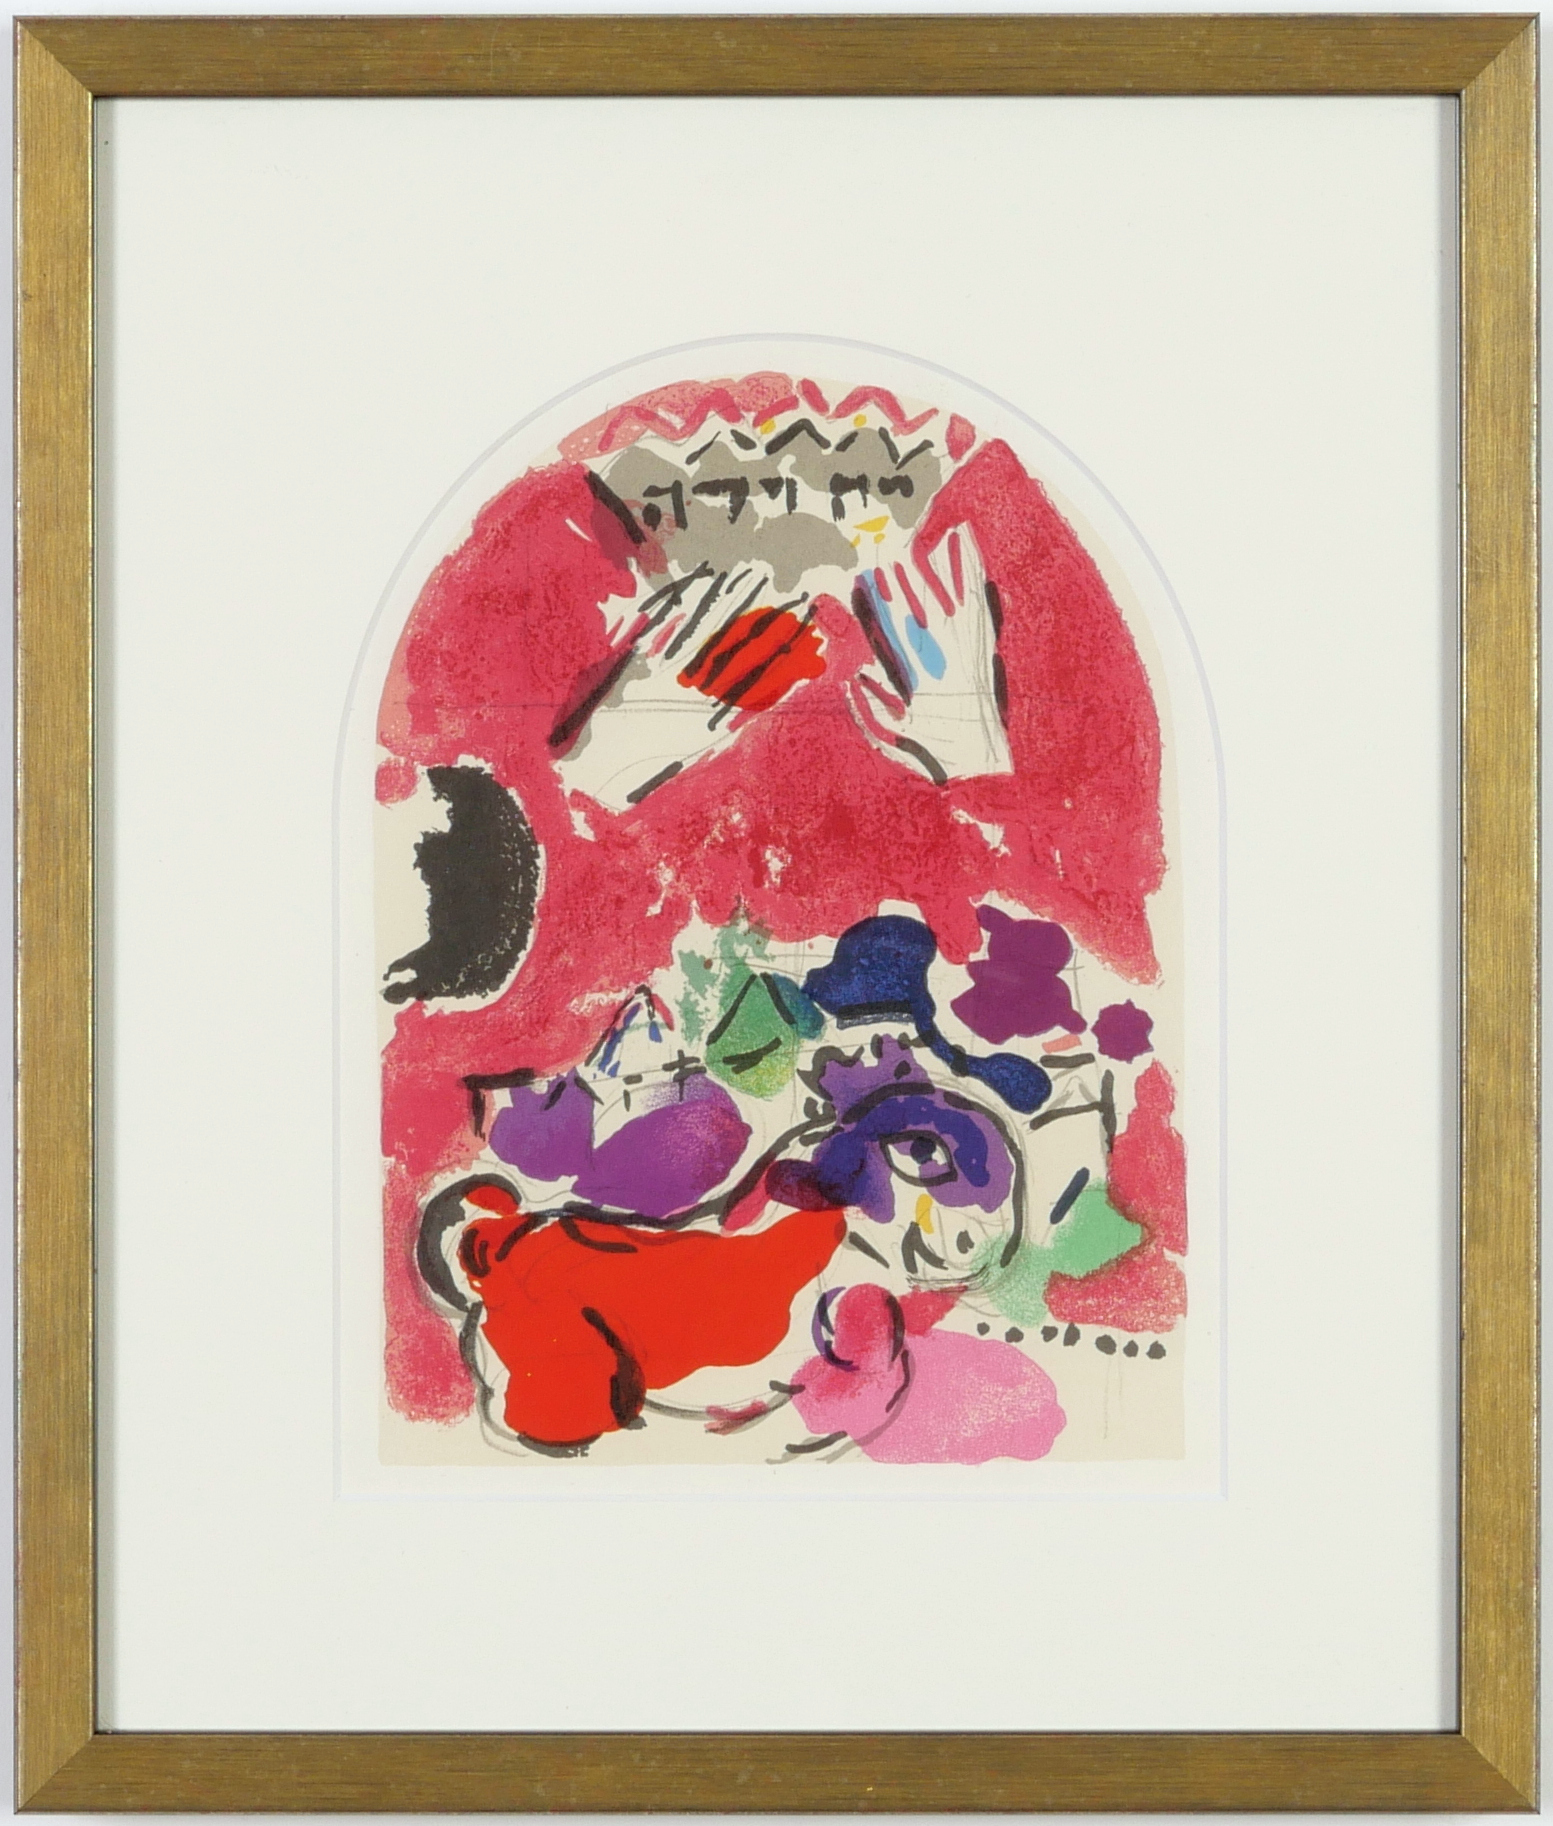 MARC CHAGALL, The Twelve Tribes, twelve lithographs in colour, printed in Paris by Mourlot 1962, - Image 12 of 13